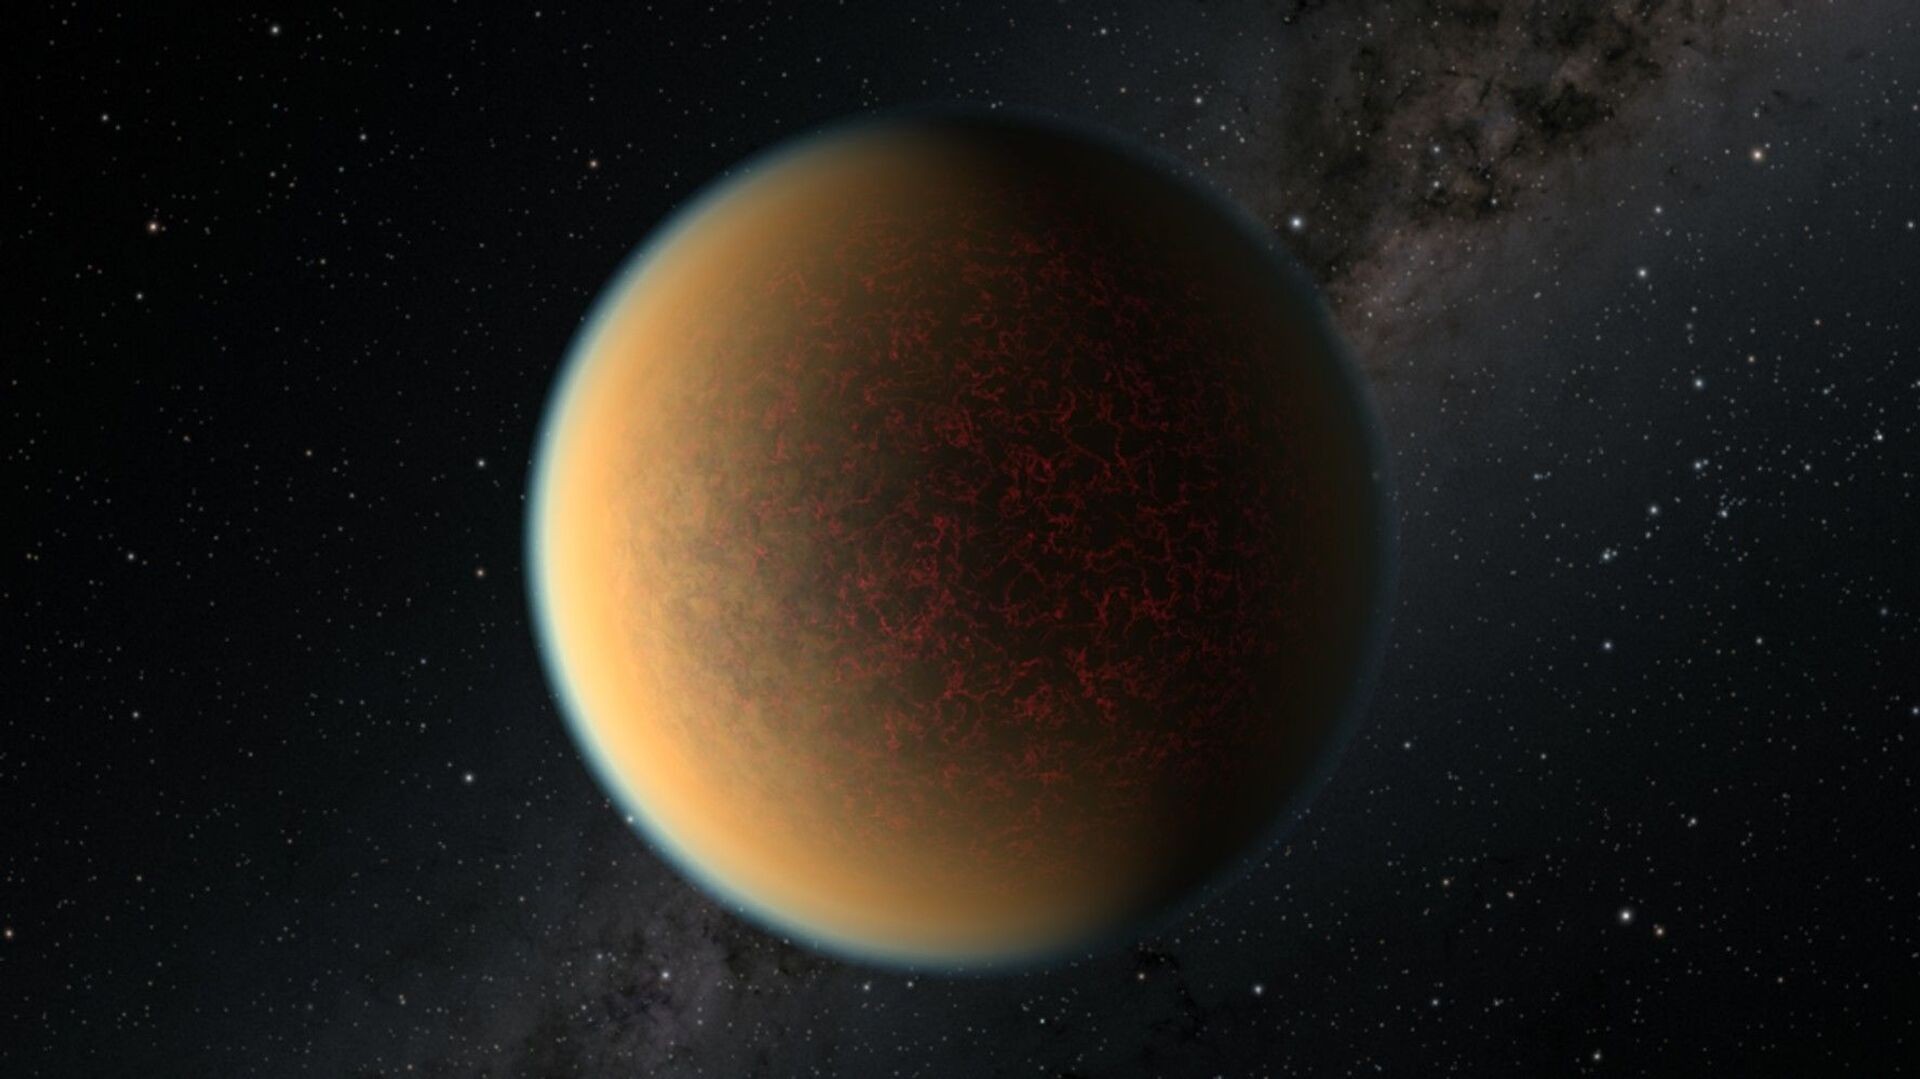 This is an artist's impression of the Earth-sized, rocky exoplanet GJ 1132 b, located 41 light-years away around a red dwarf star. Scientists using NASA's Hubble Space Telescope have found evidence this planet may have lost its original atmosphere but gained a second one that contains a toxic mix of hydrogen, methane and hydrogen cyanide. - Sputnik International, 1920, 06.12.2022